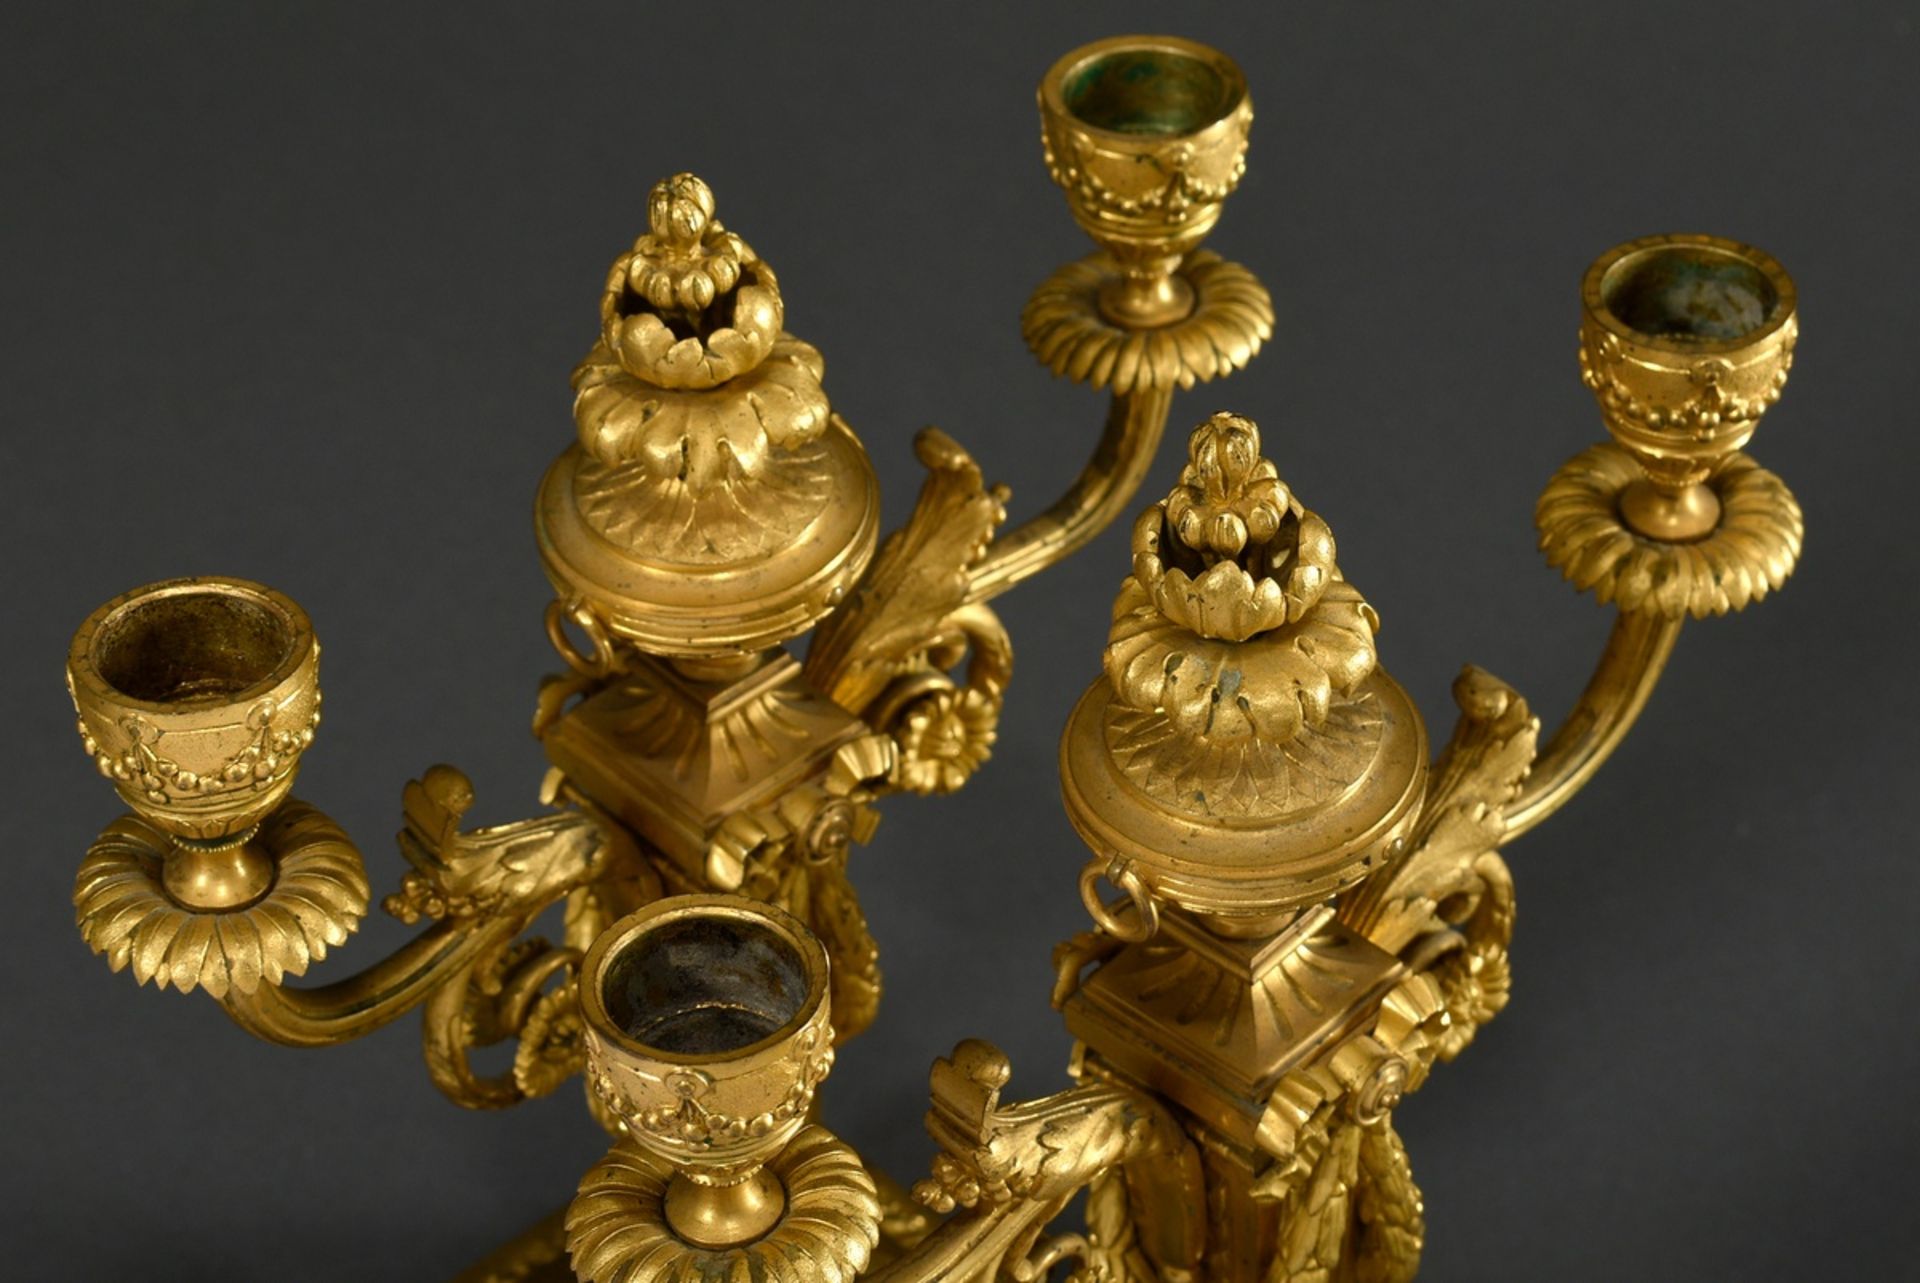 2 Fire-gilt bronze girandoles in Louis XVI style in finest execution, base ornaments screwed on, bo - Image 4 of 5